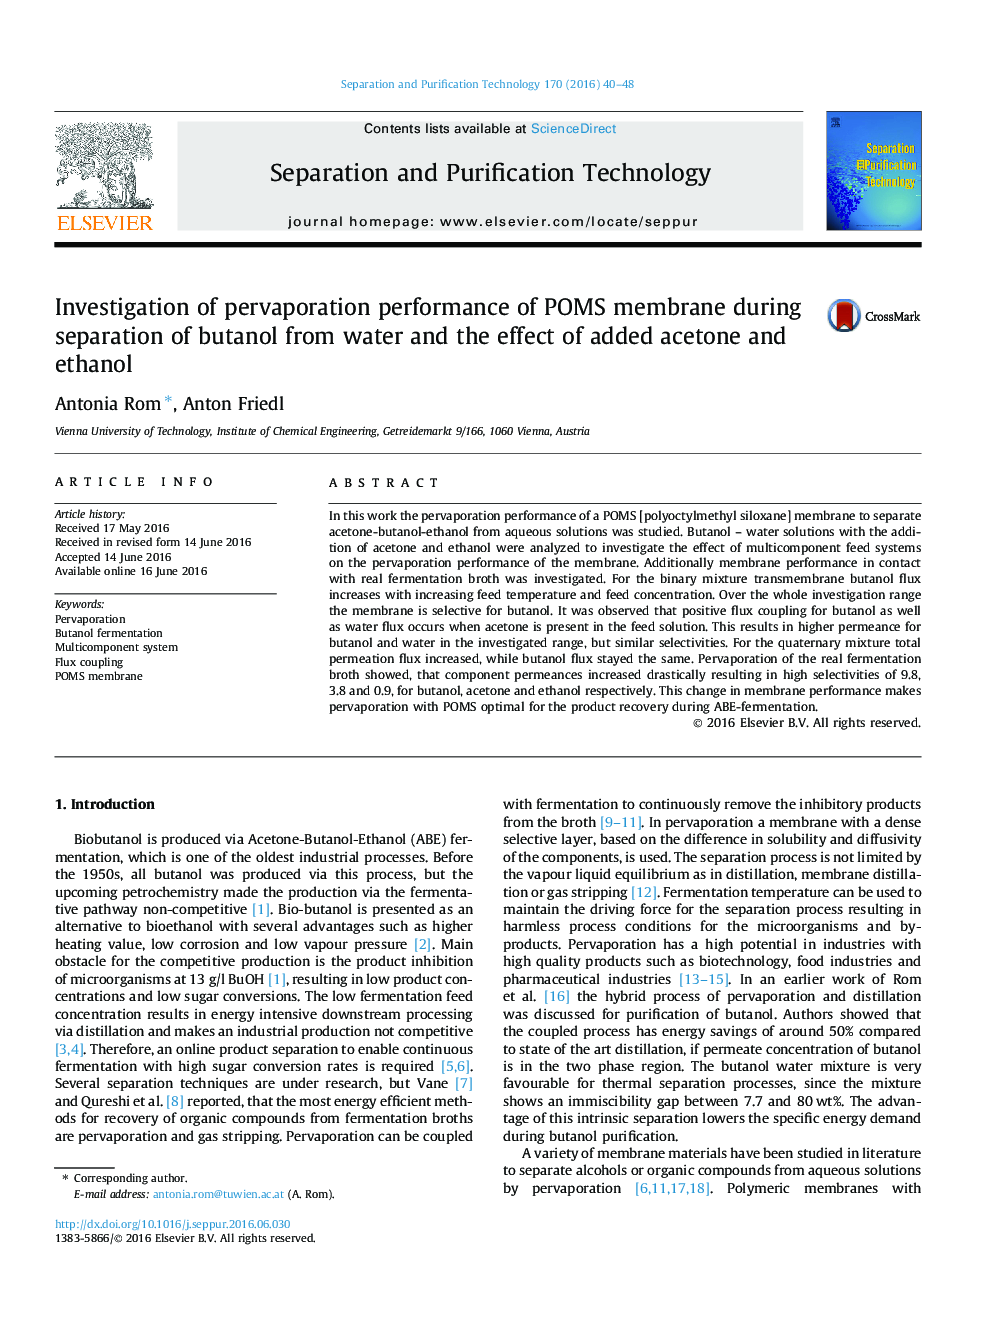 Investigation of pervaporation performance of POMS membrane during separation of butanol from water and the effect of added acetone and ethanol